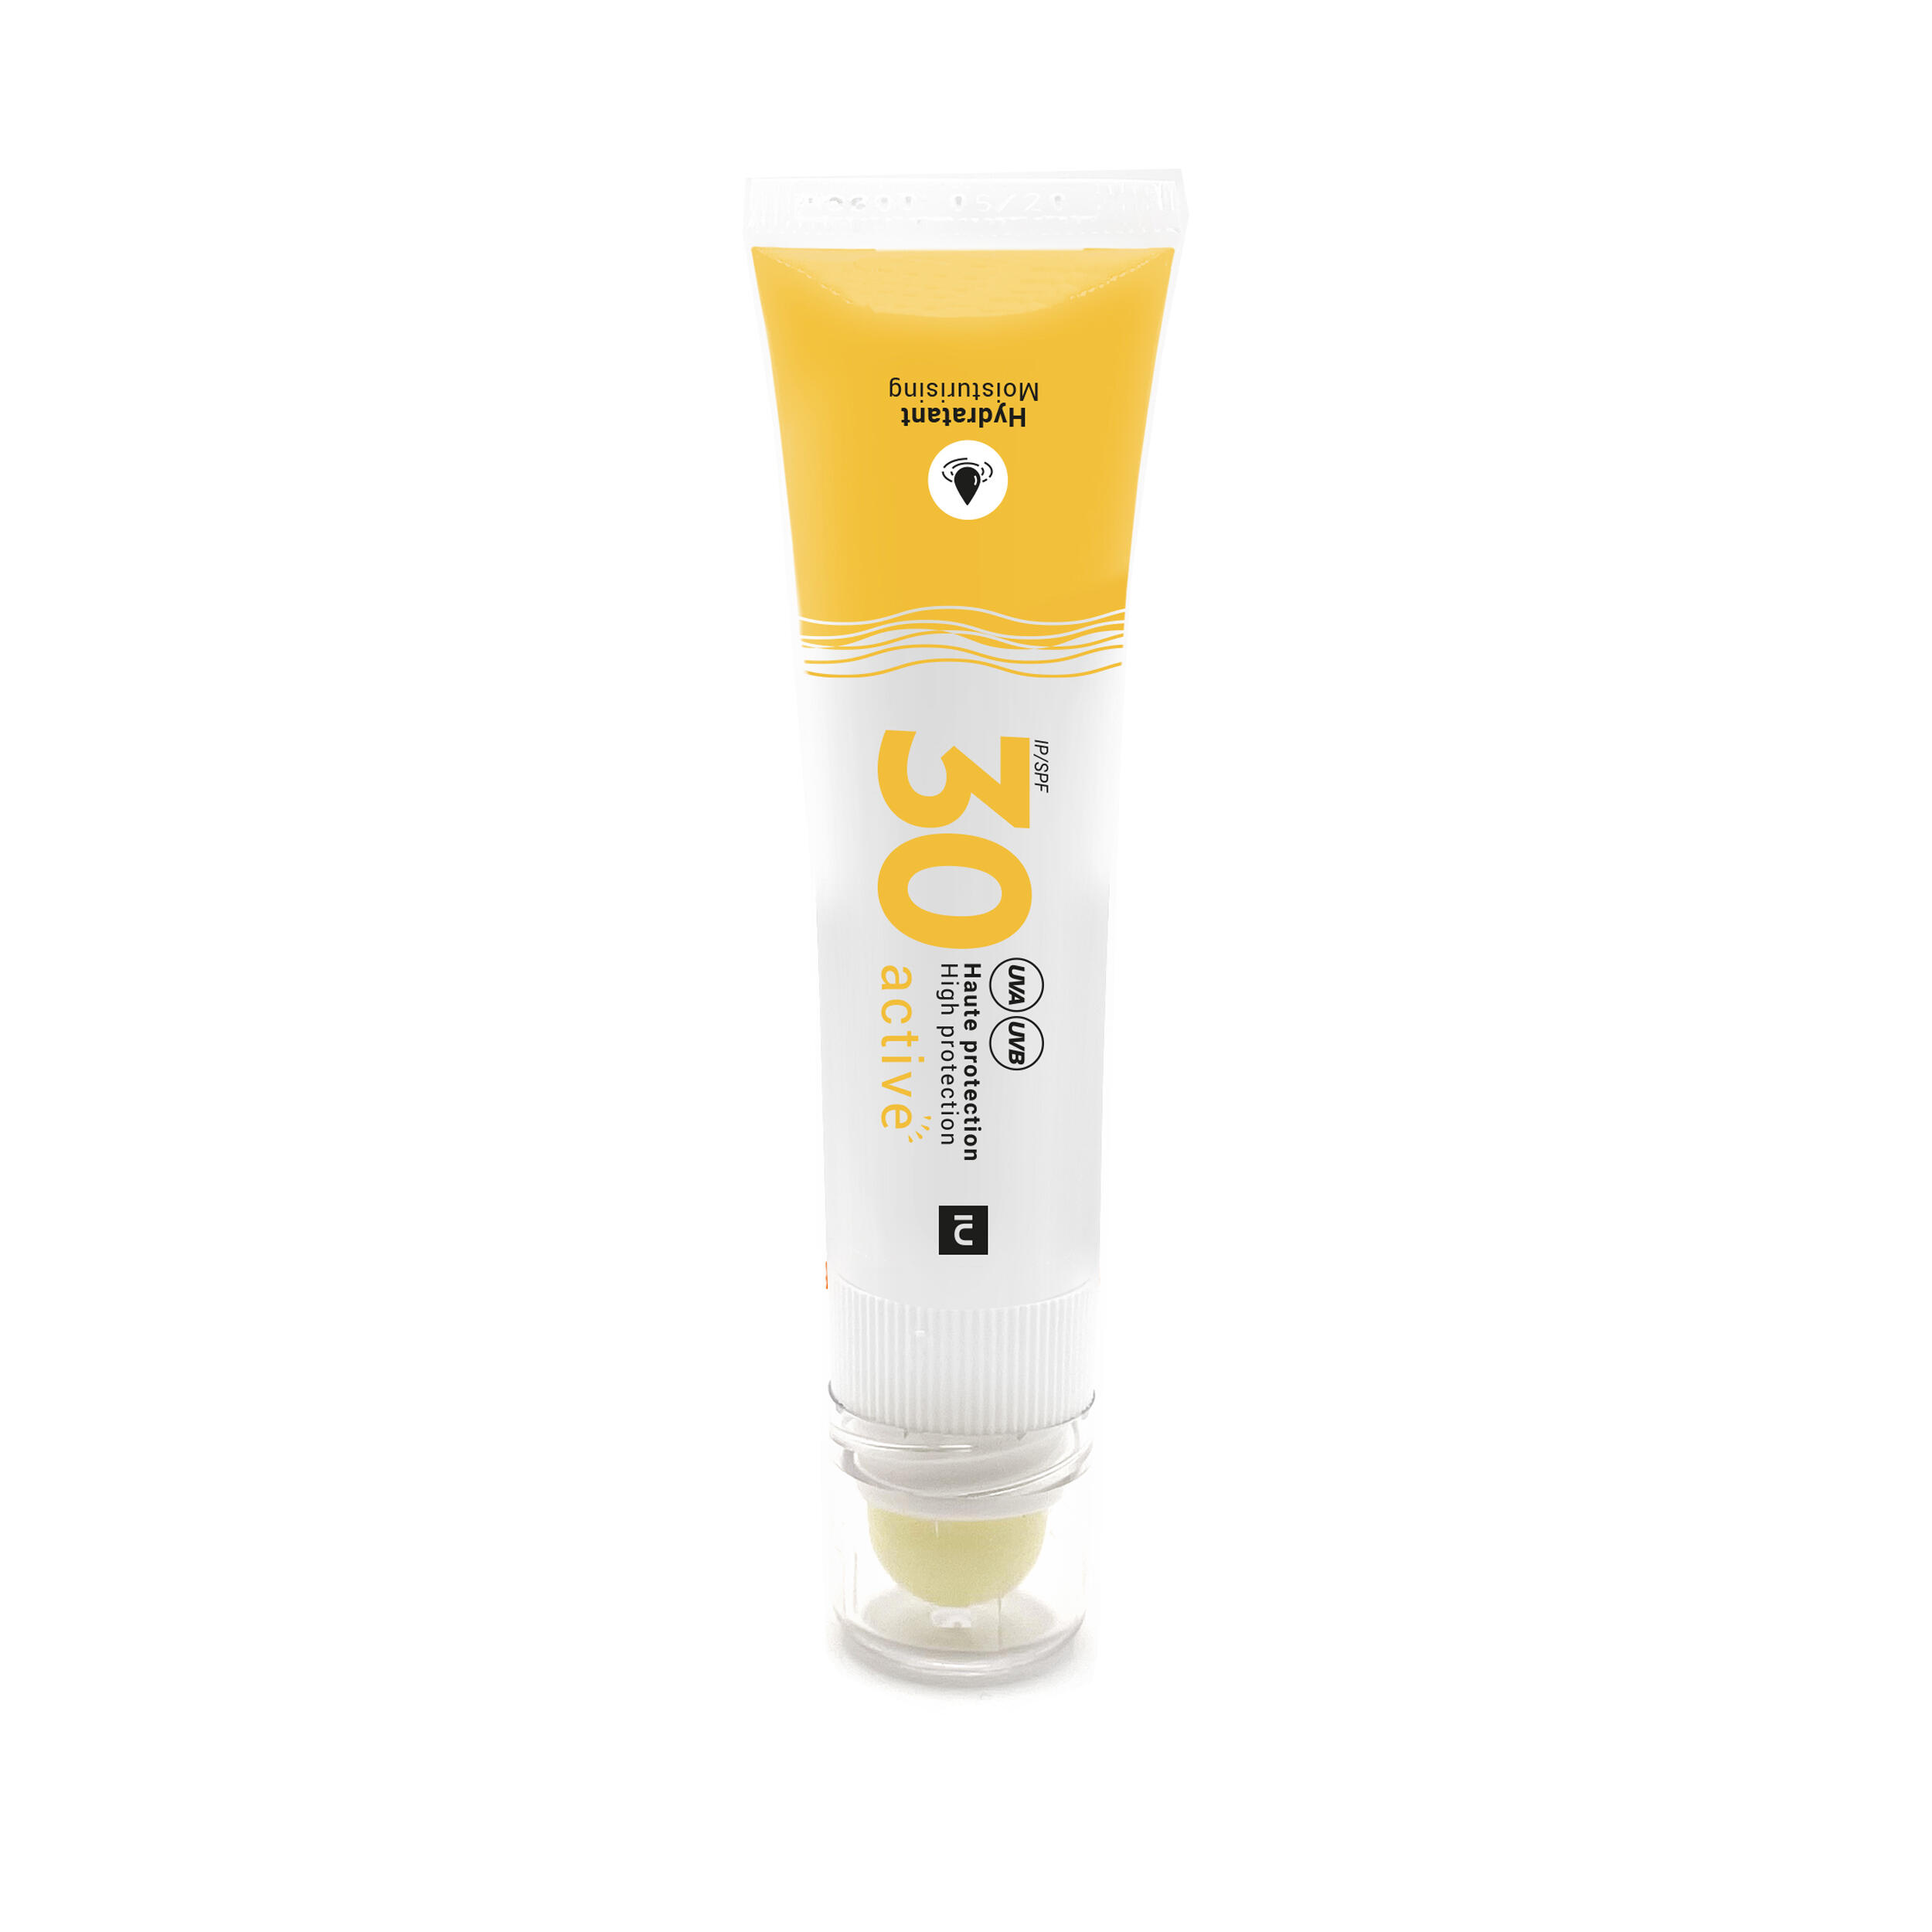 2-in-1 duo pack, sun face cream and lip balm, protection rating 30 1/1